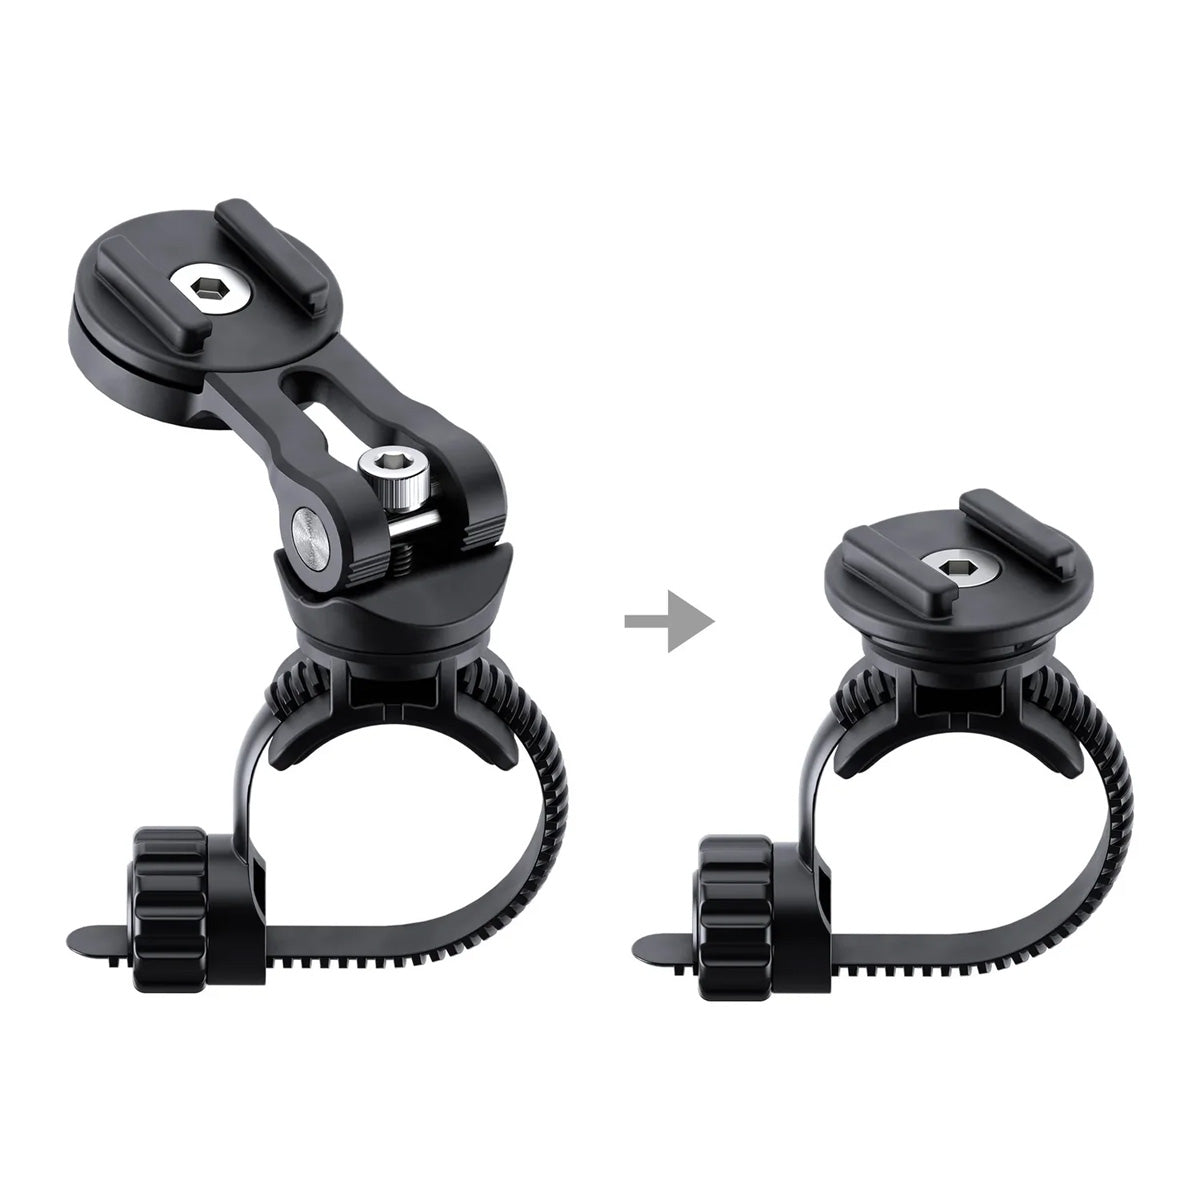 SP Connect Universal Phone Mount - Works with all Pure scooters